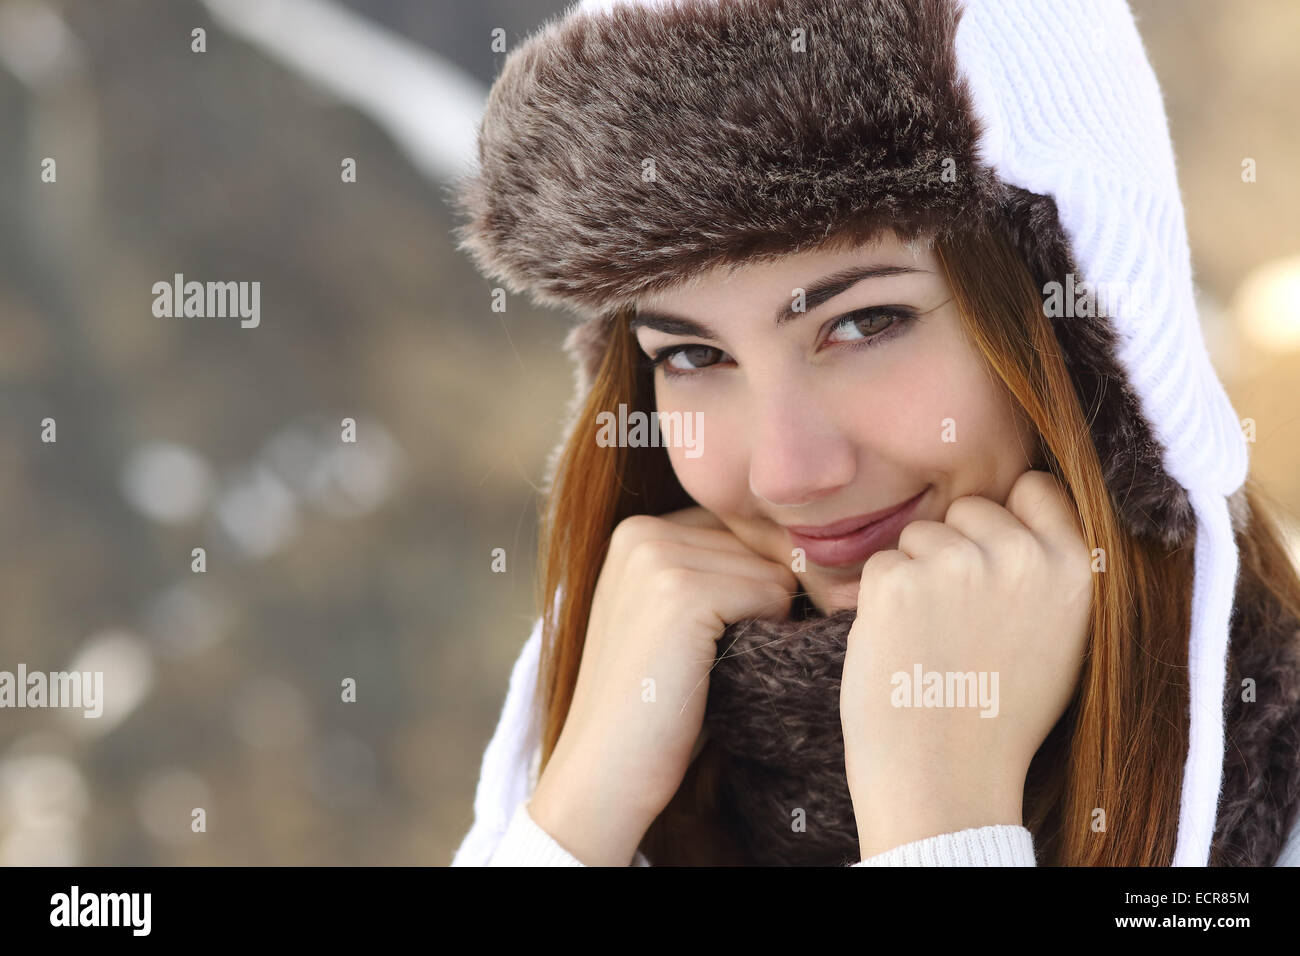 Beauty woman face portrait warmly clothed in winter holding a scarf outdoors Stock Photo